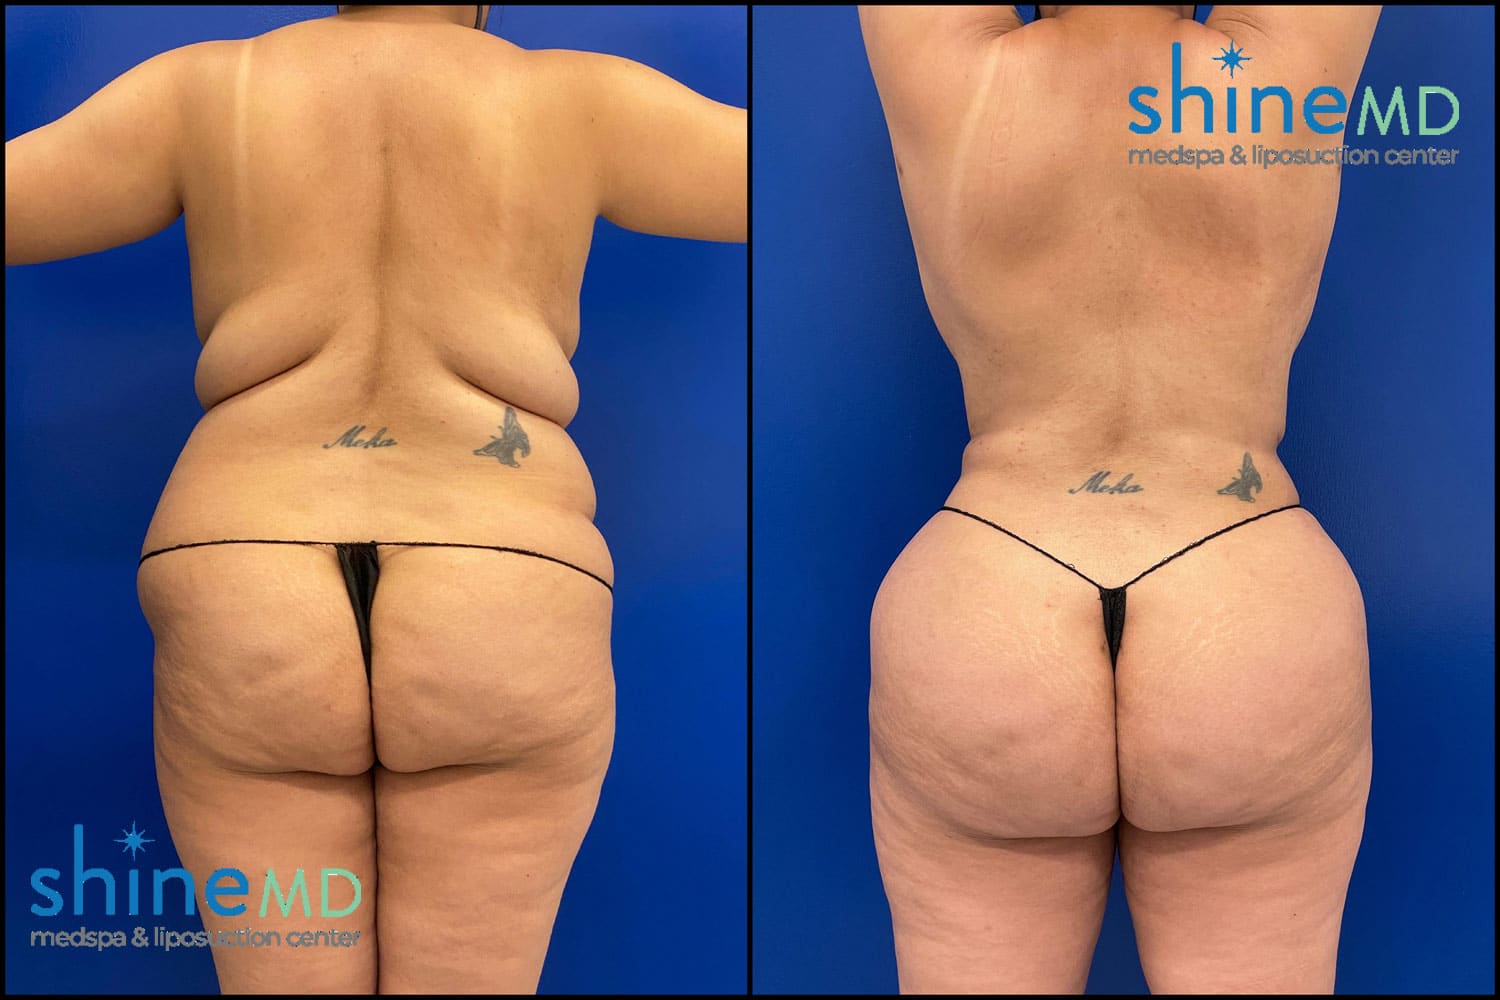 Liposuction Surgery Results before after photos